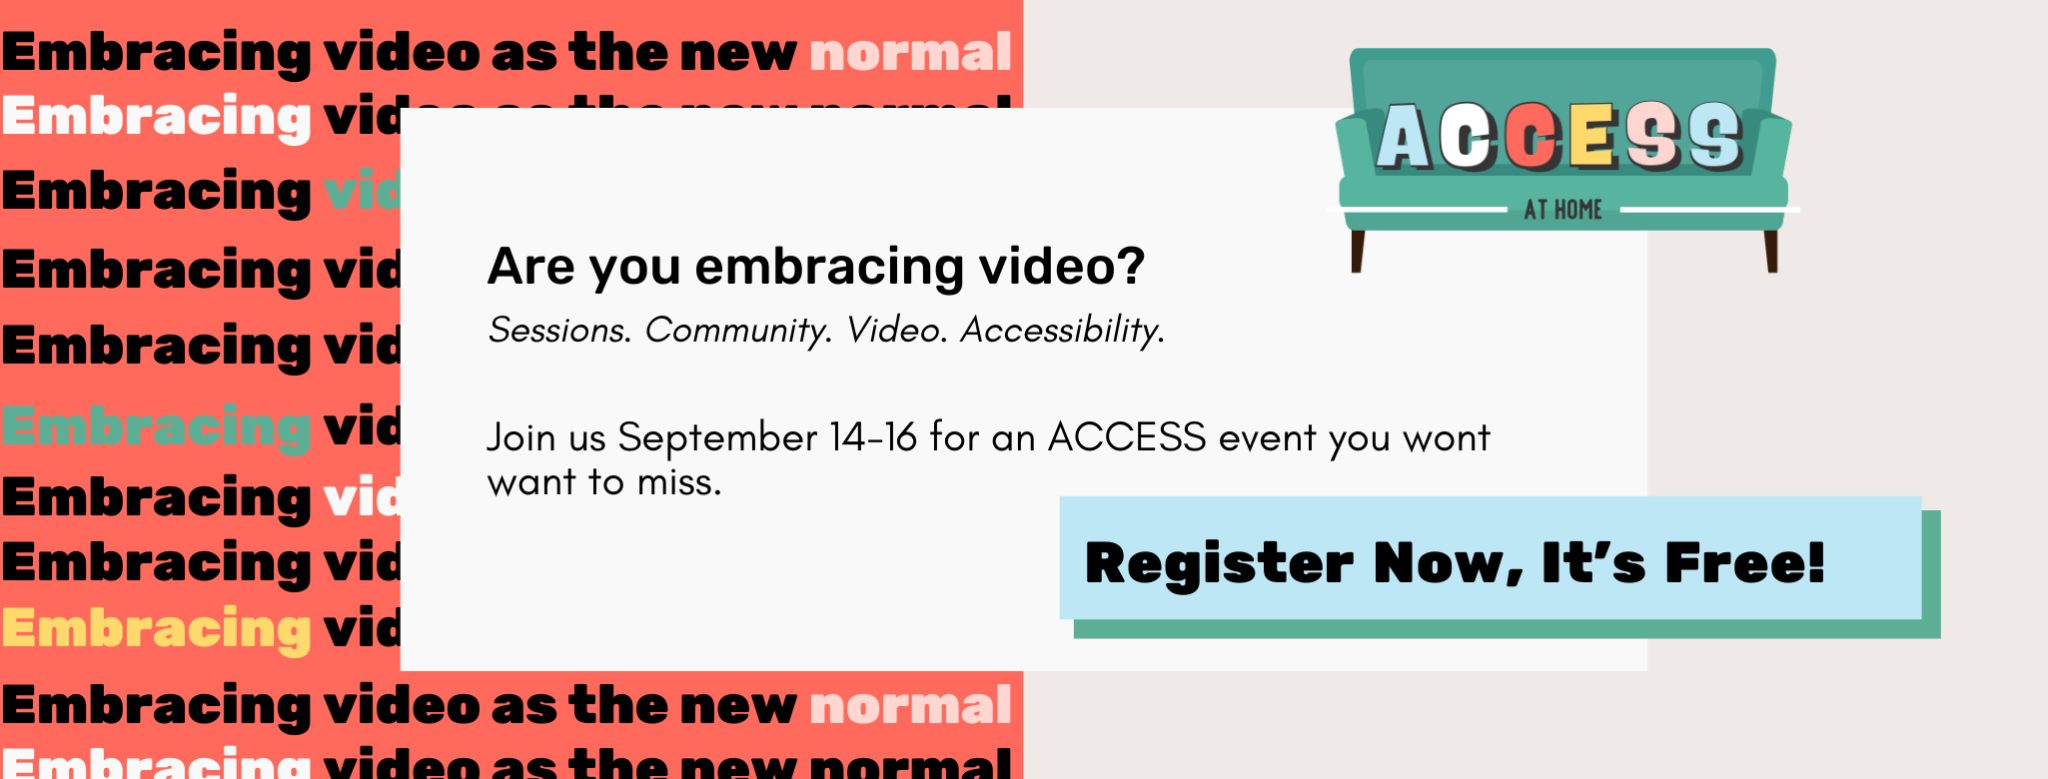 Register now for ACCESS at home, a free virtual event from September 14 to 16.